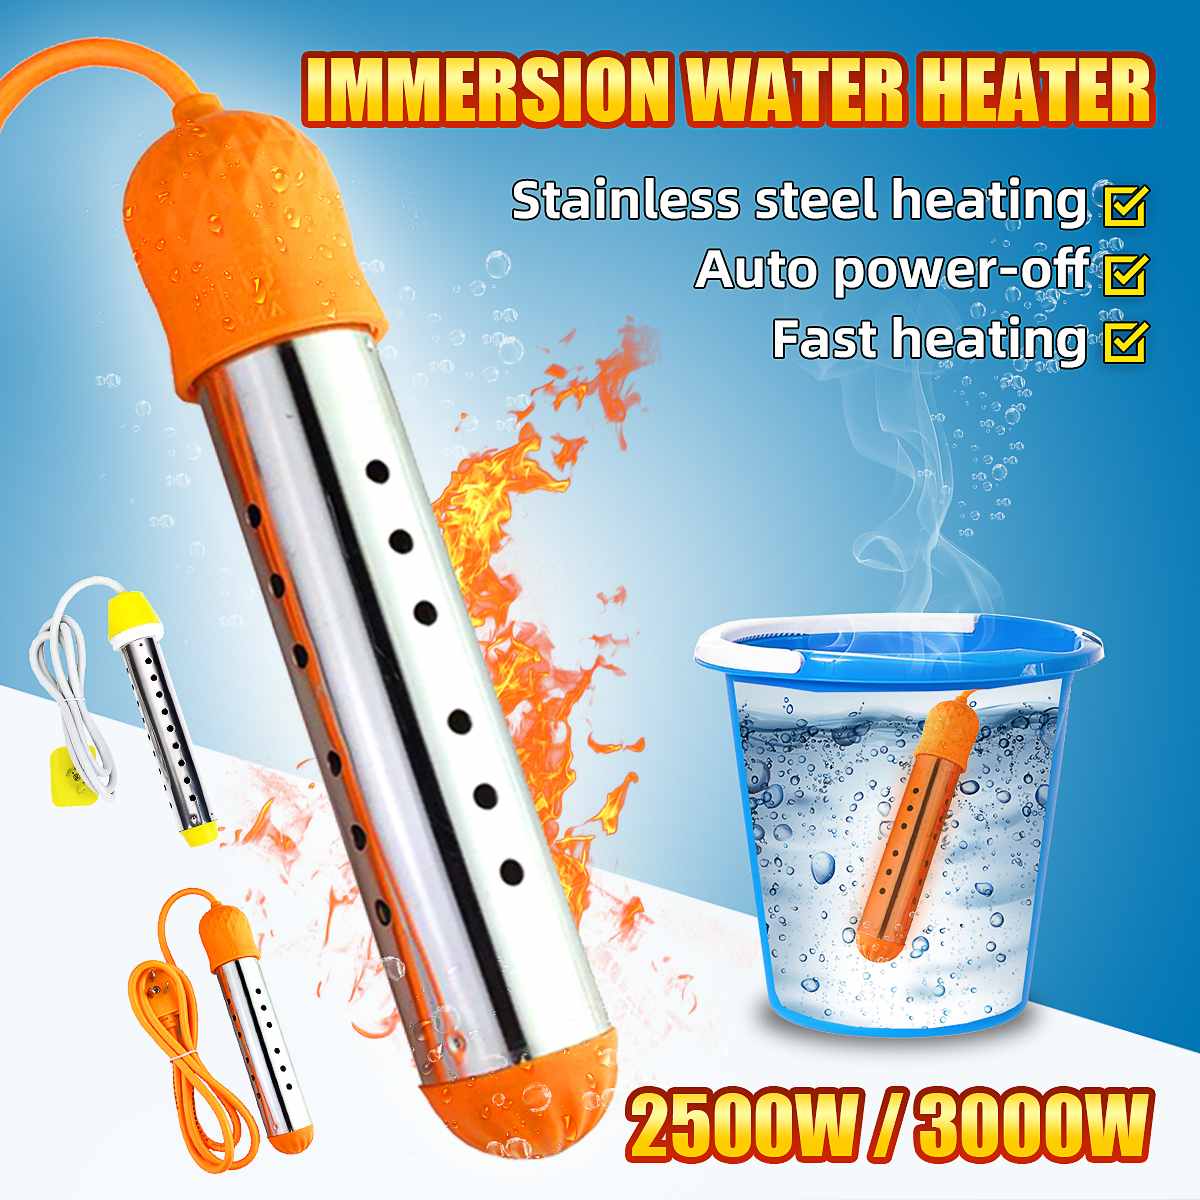 Invasive Electric Water Heater Water Heater Heating Element Outdoor Camping 2500/3000W 220V Can Use Bathtub Swimming Pool